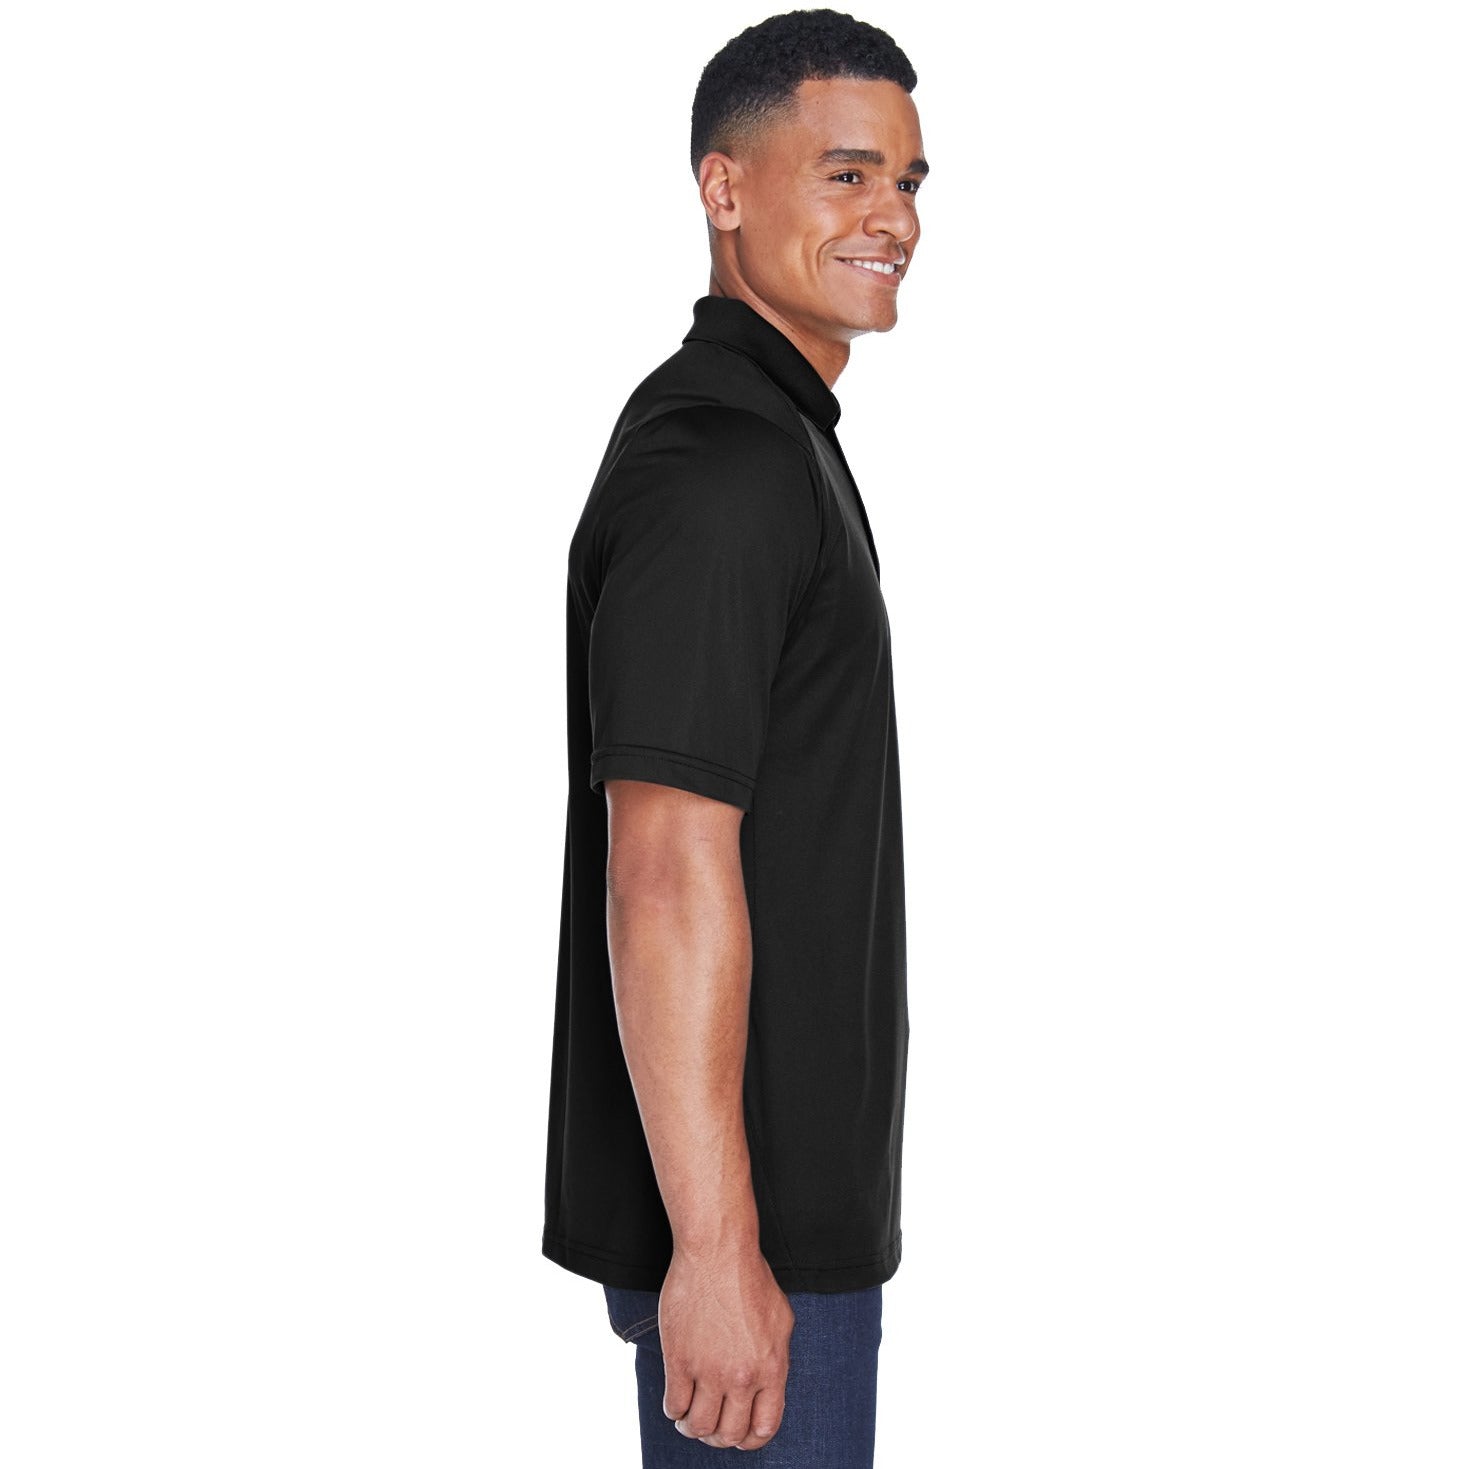 Ash City - Extreme Men's Eperformance™ Shield Snag Protection Short-Sleeve Polo